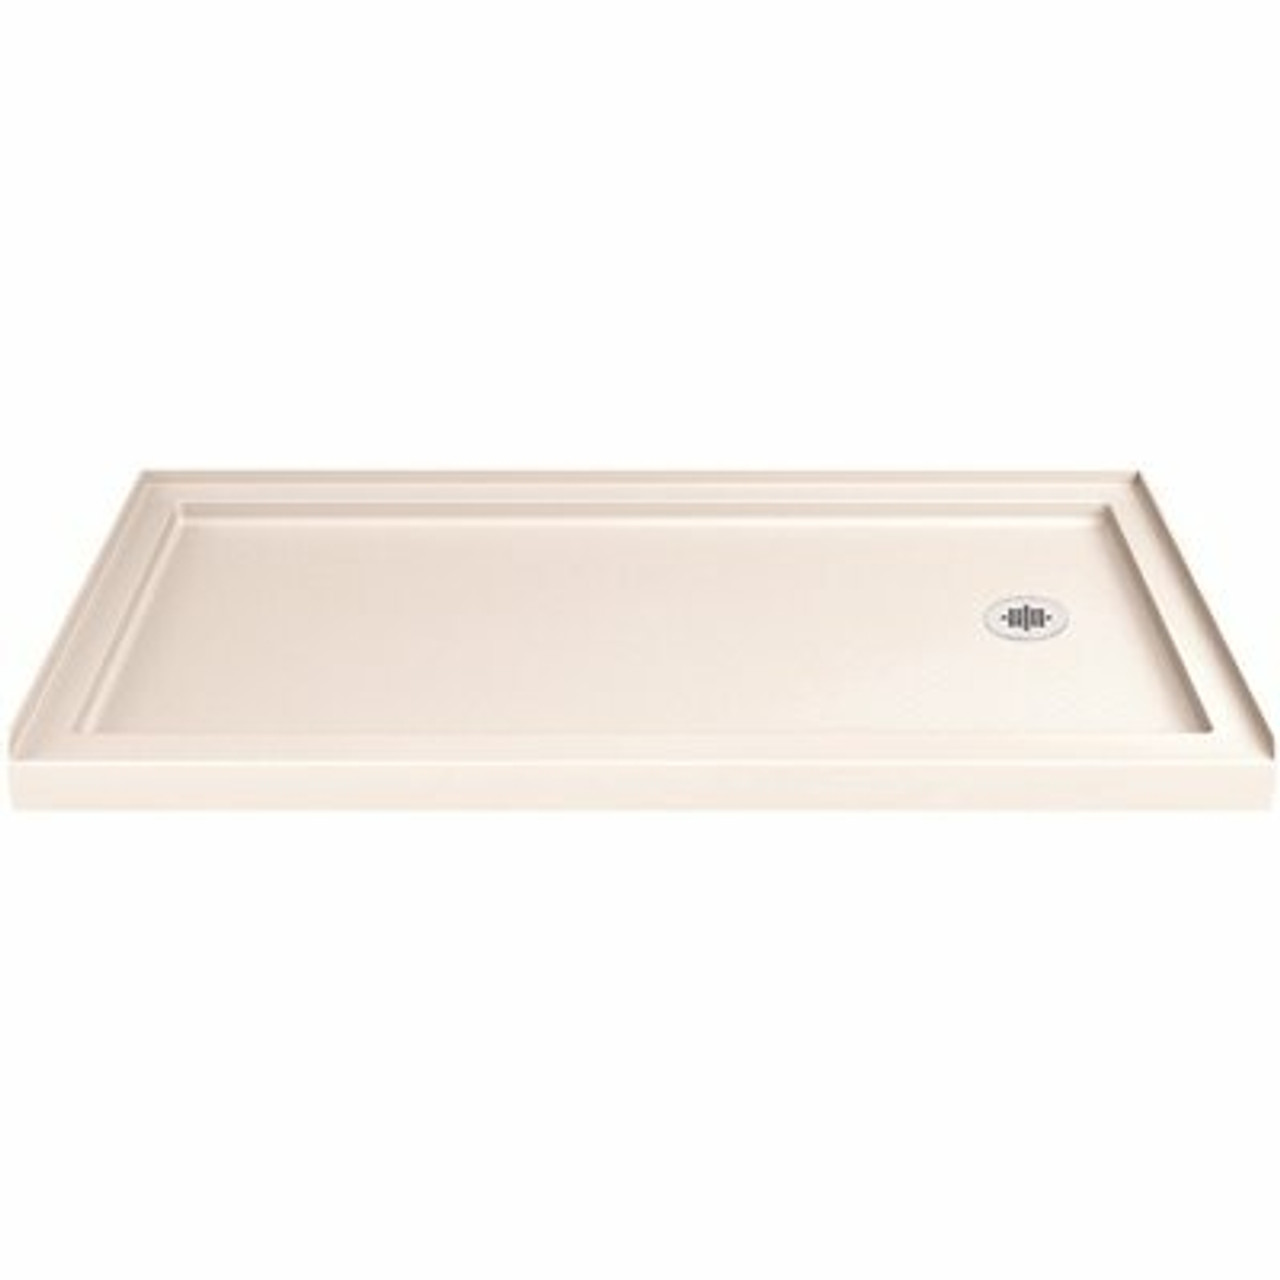 Dreamline Slimline 36 In. D X 60 In. W Single Threshold Shower Base In Biscuit With Right Hand Drain